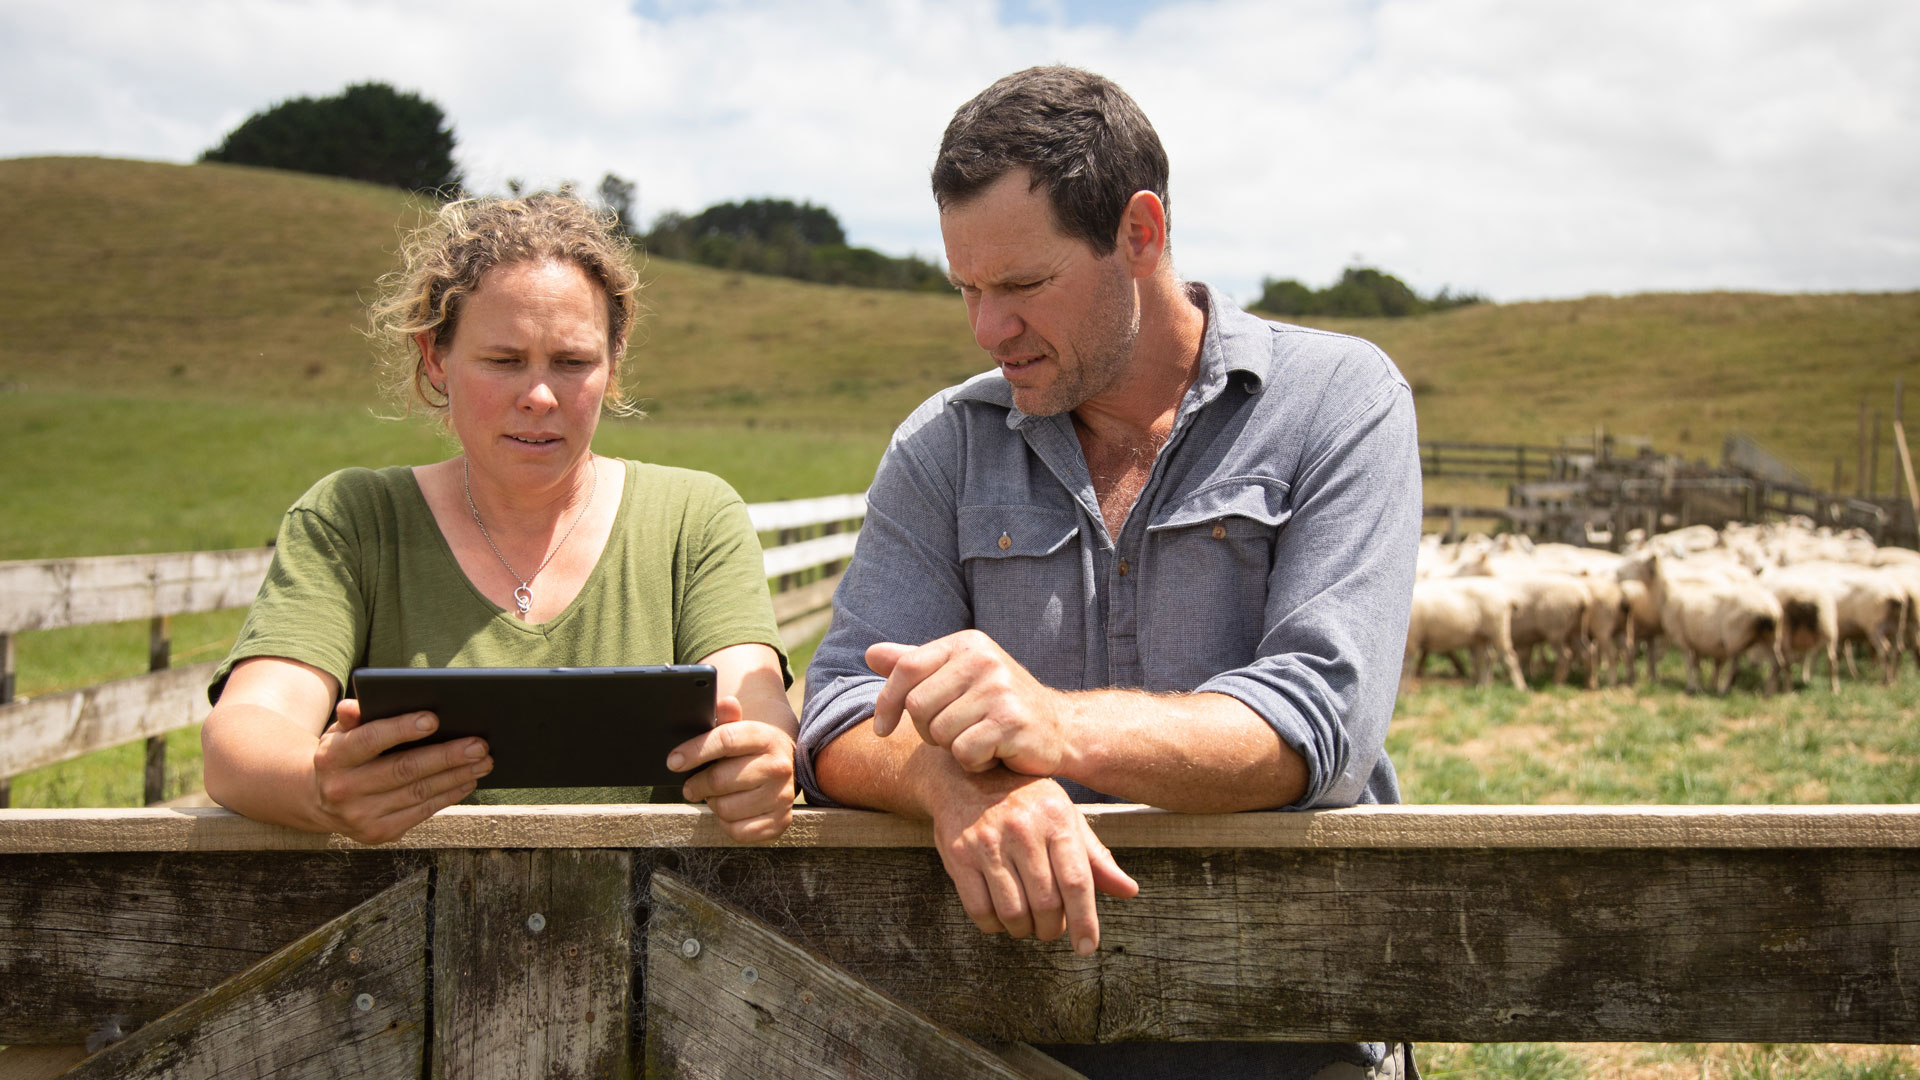 Farmers looking at a digital tablet in a field with livestock in it.